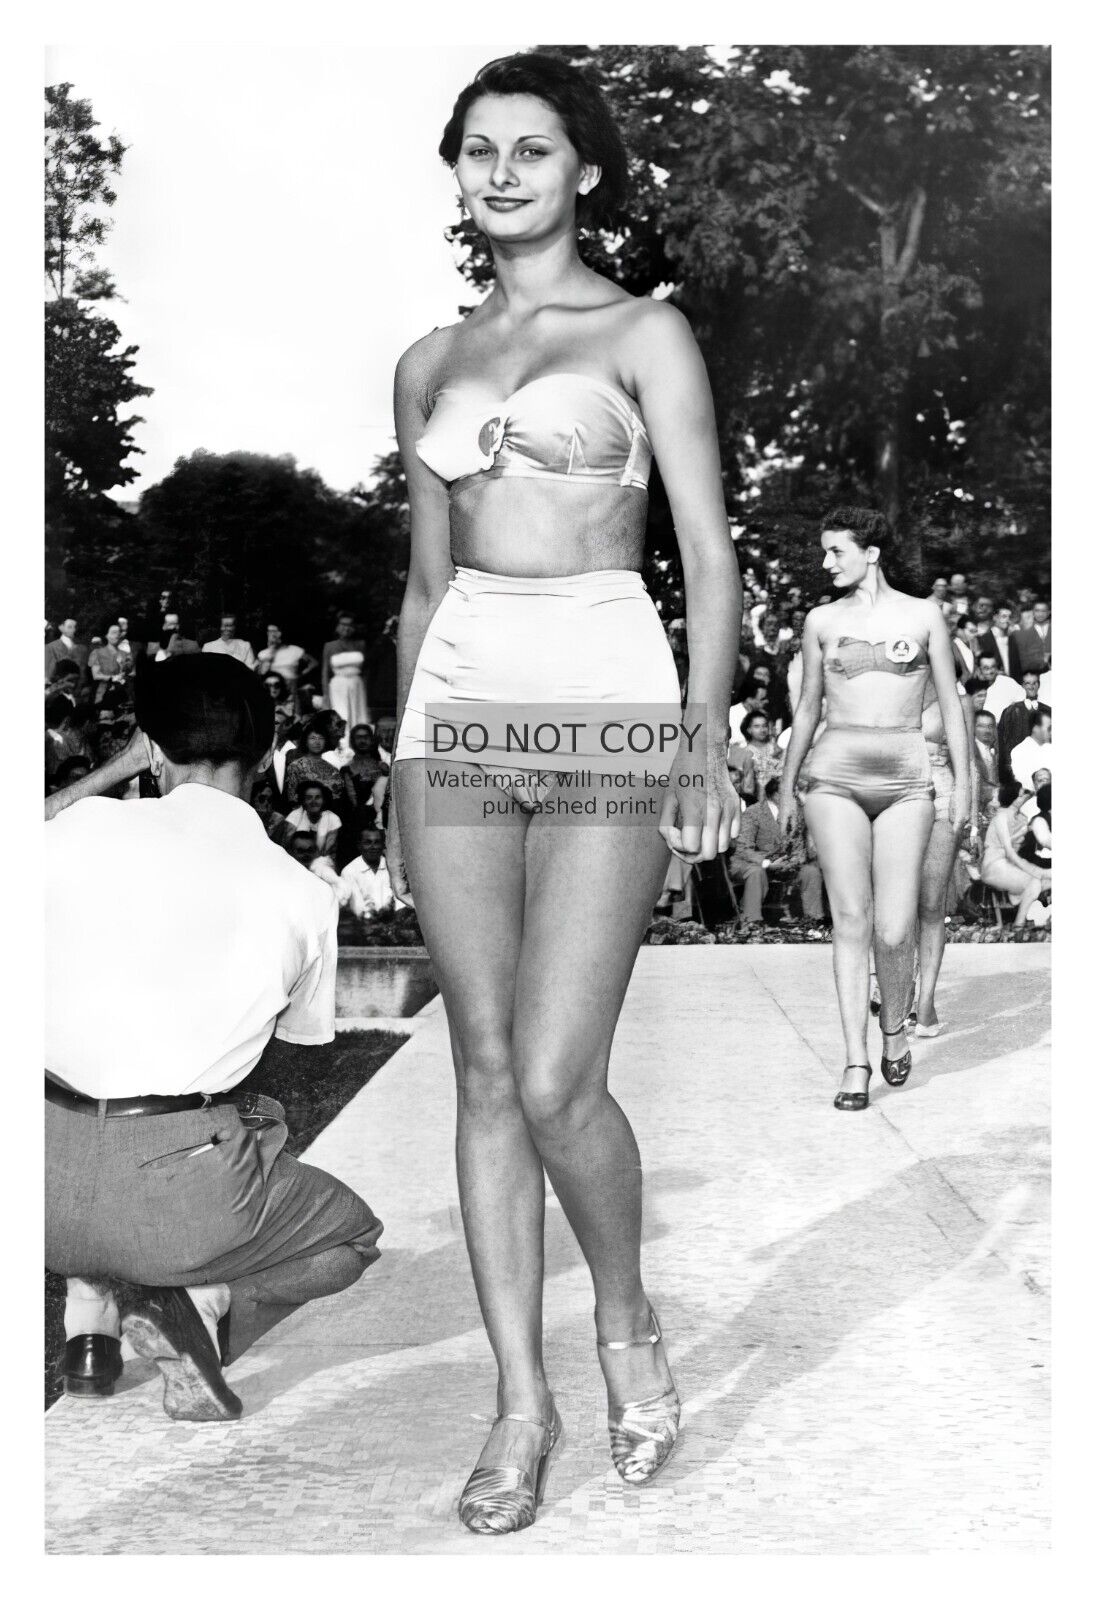 YOUNG SOPHIA LOREN AT BEAUTY CONTEST IN NAPLES FRANCE 1949 4X6 B&W PHOTO